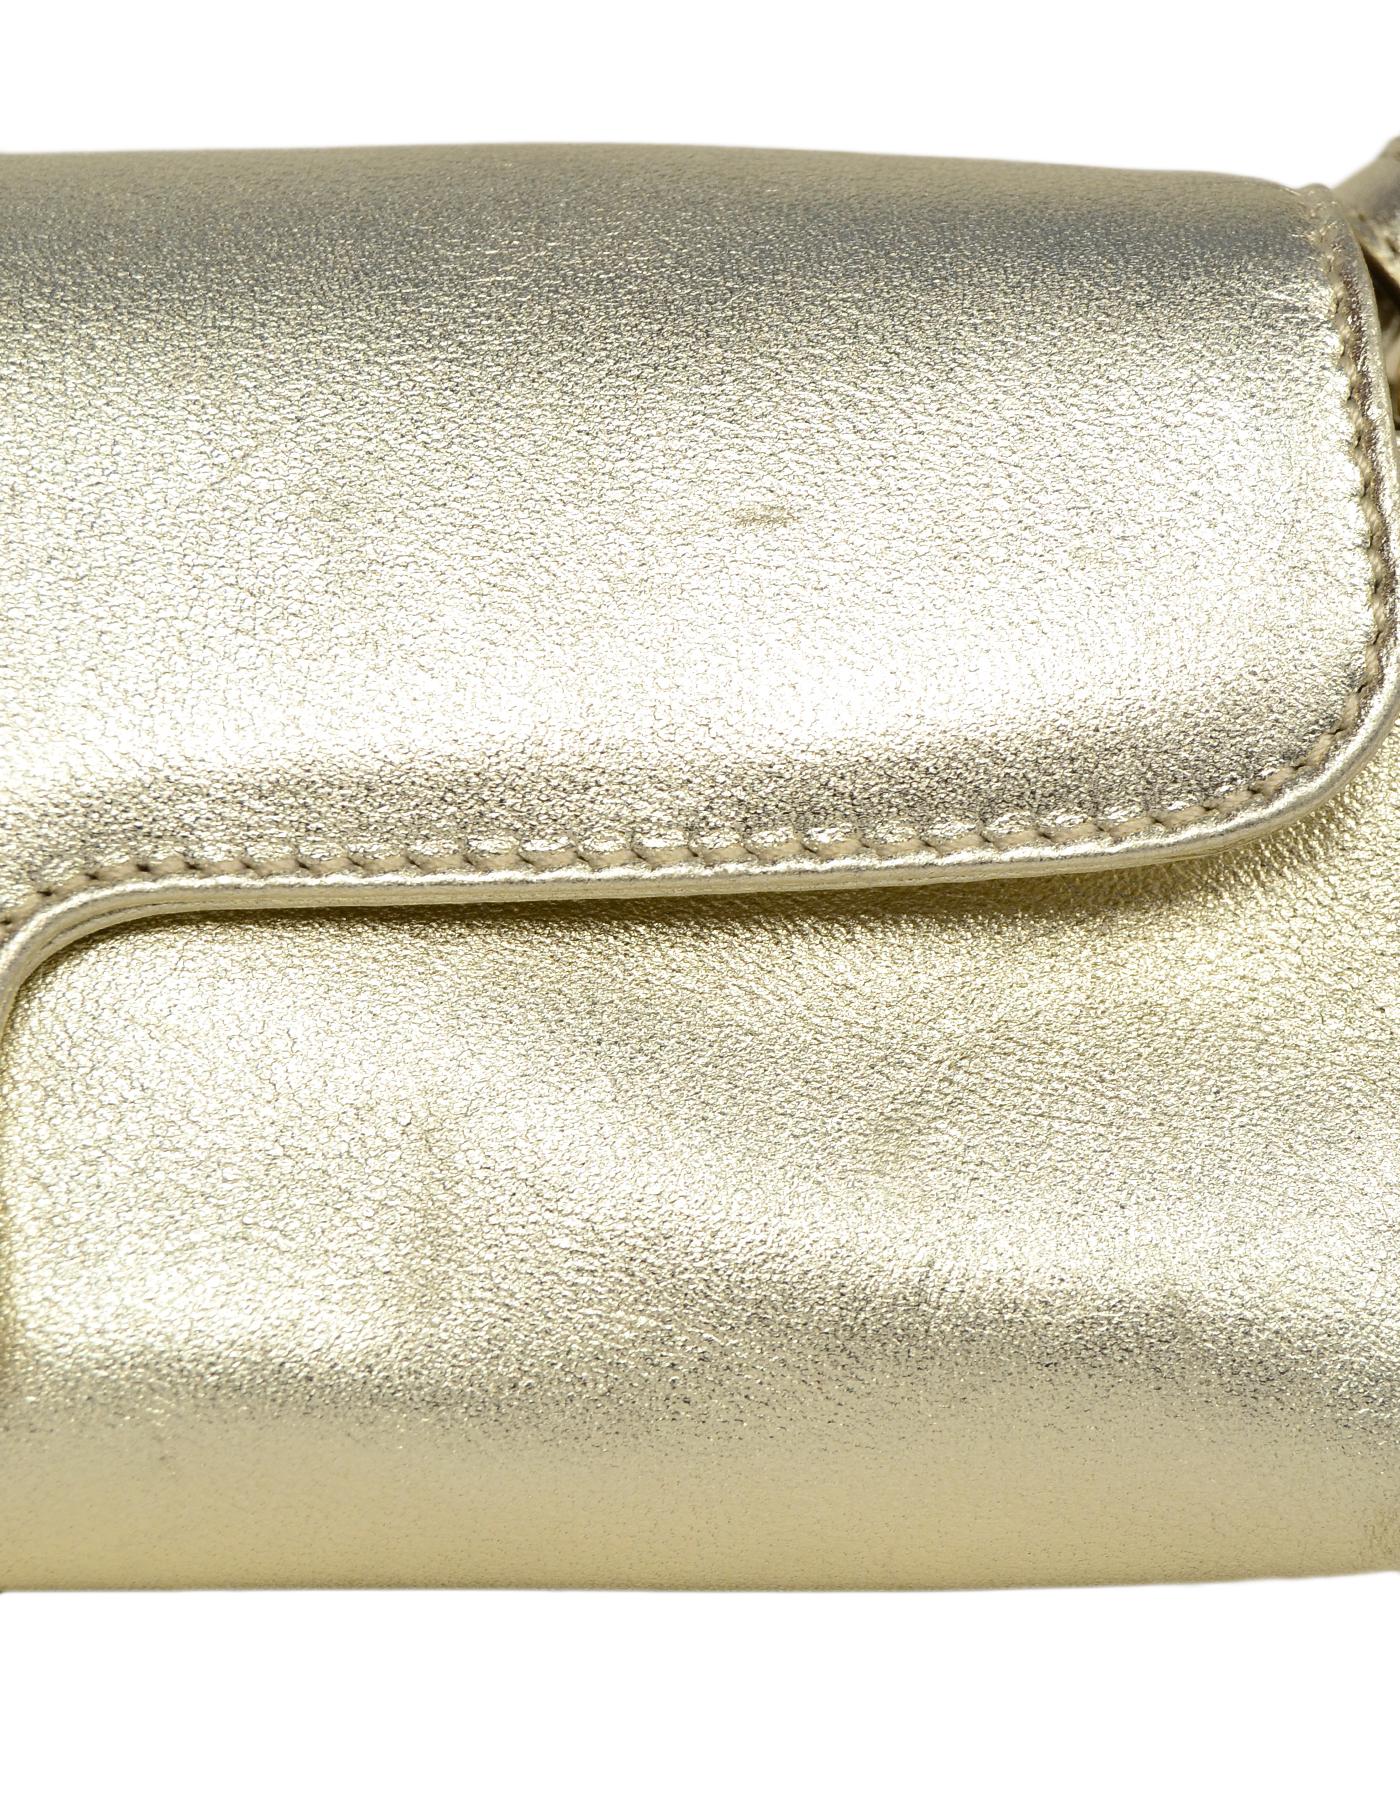 Jimmy Choo Gold Lame Leather Small Pochette Bag 3